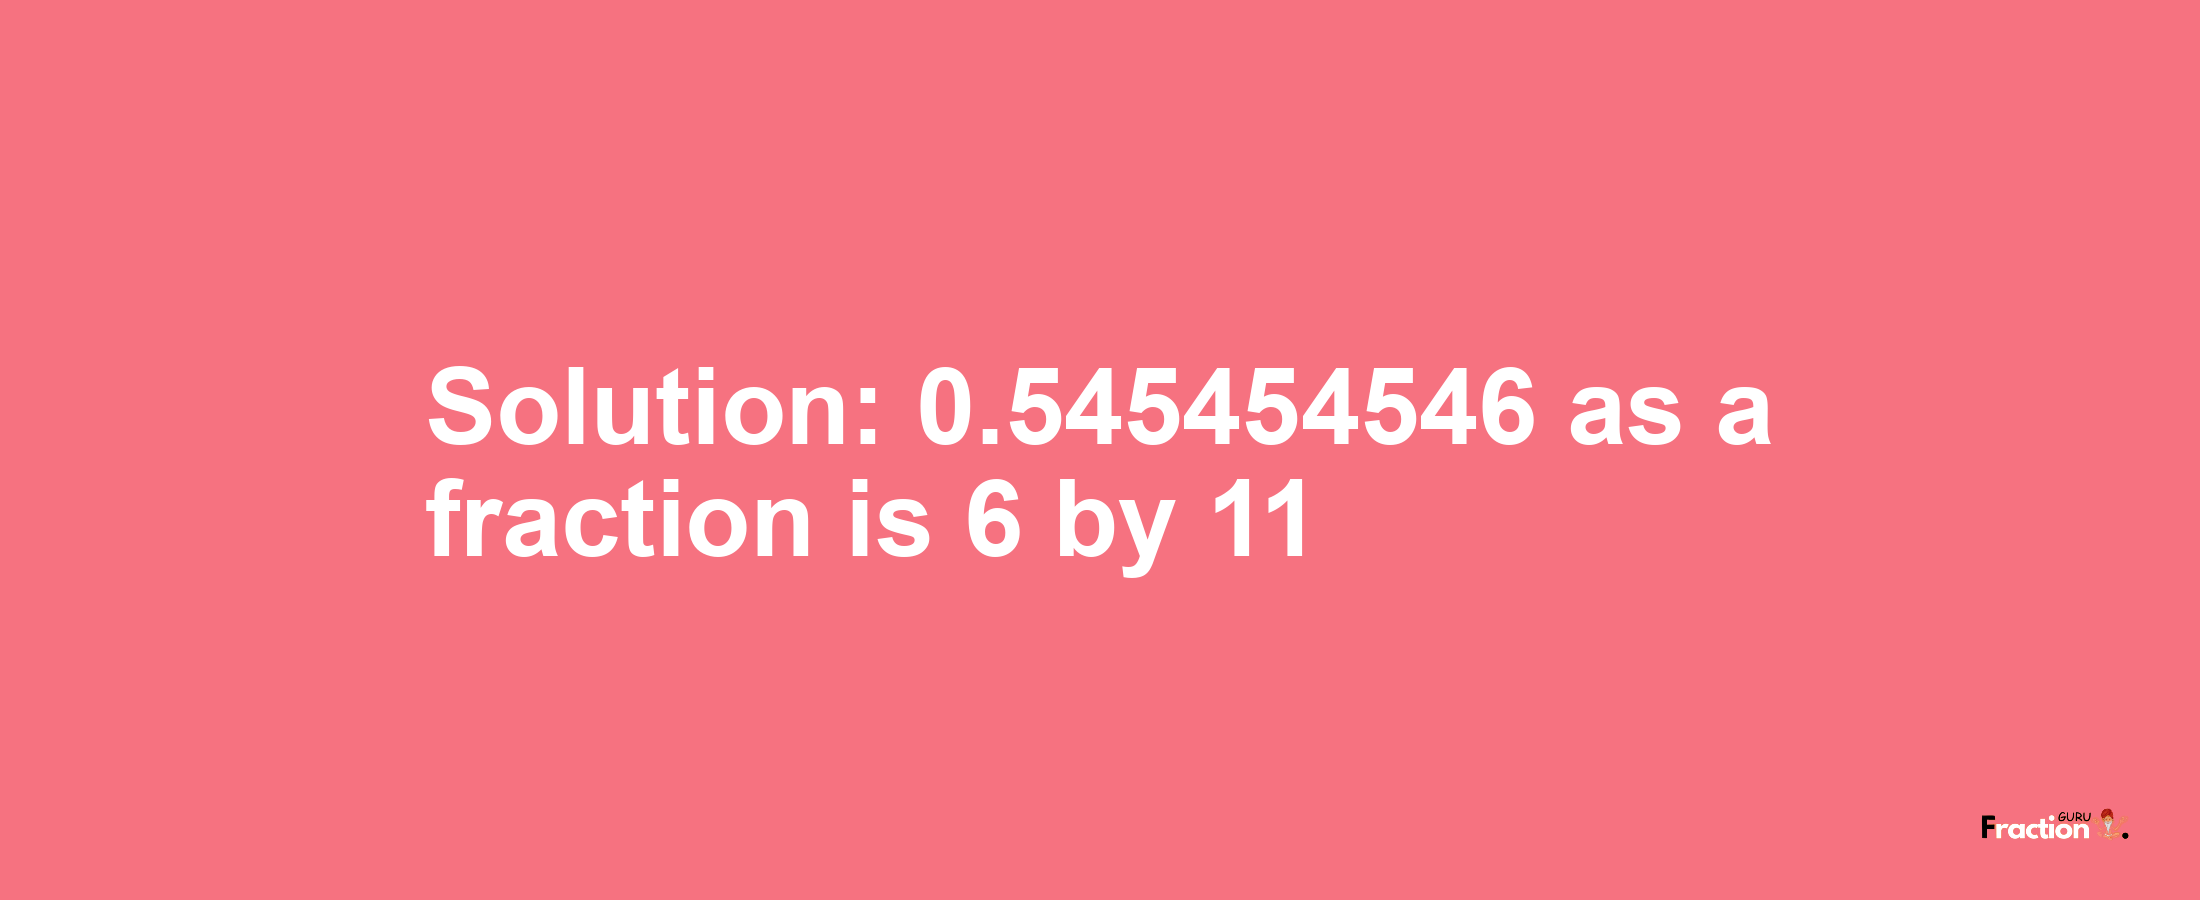 Solution:0.545454546 as a fraction is 6/11